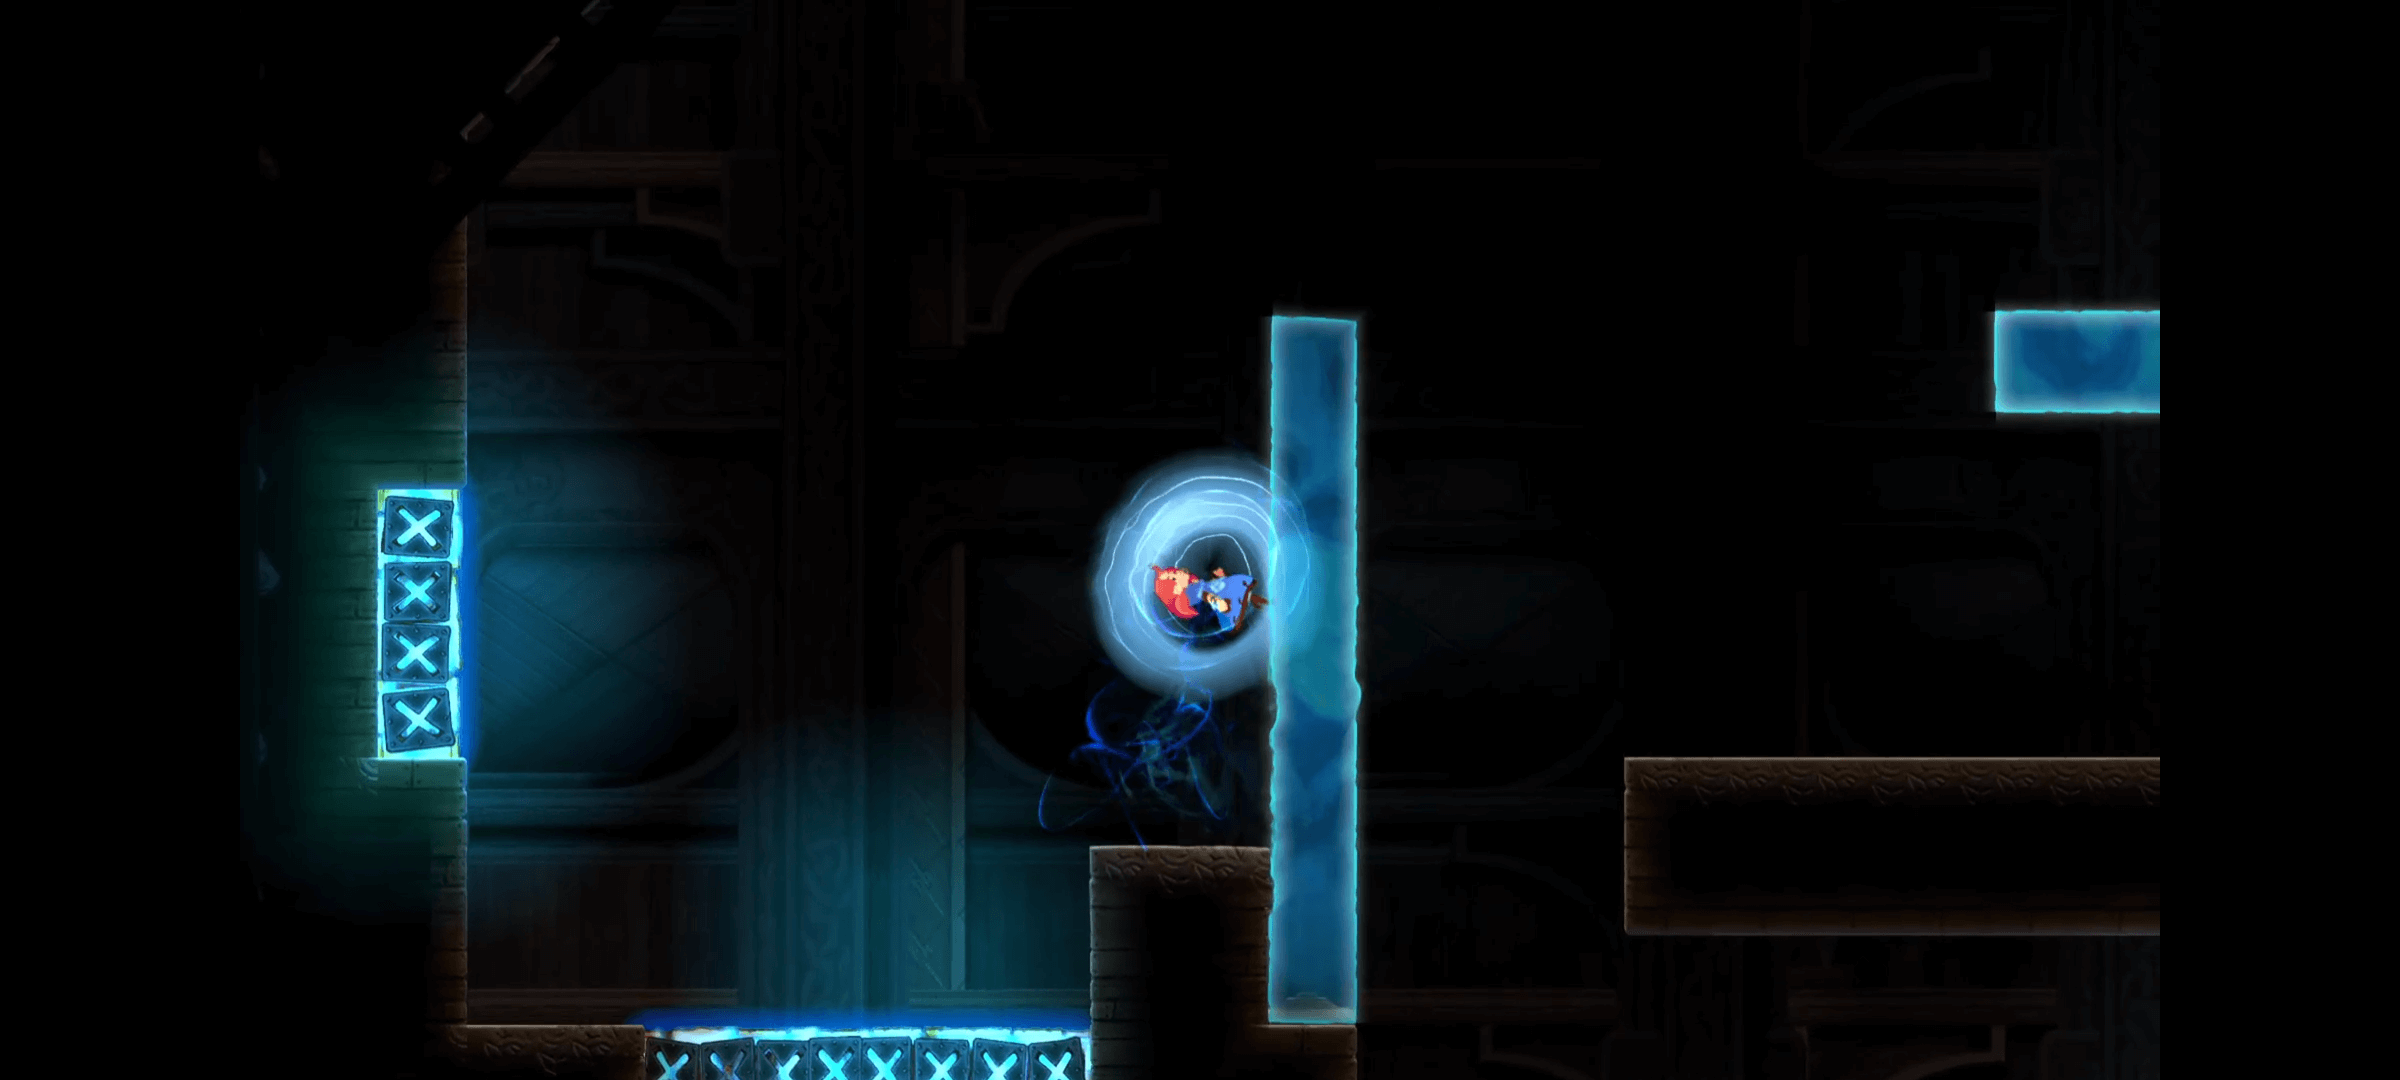 A dark atmospheric environment with different glowing blue blocks. A female character with red hair wearing a blue dress is using a magnetic ability to defy gravity to vertically climb one of the blocks